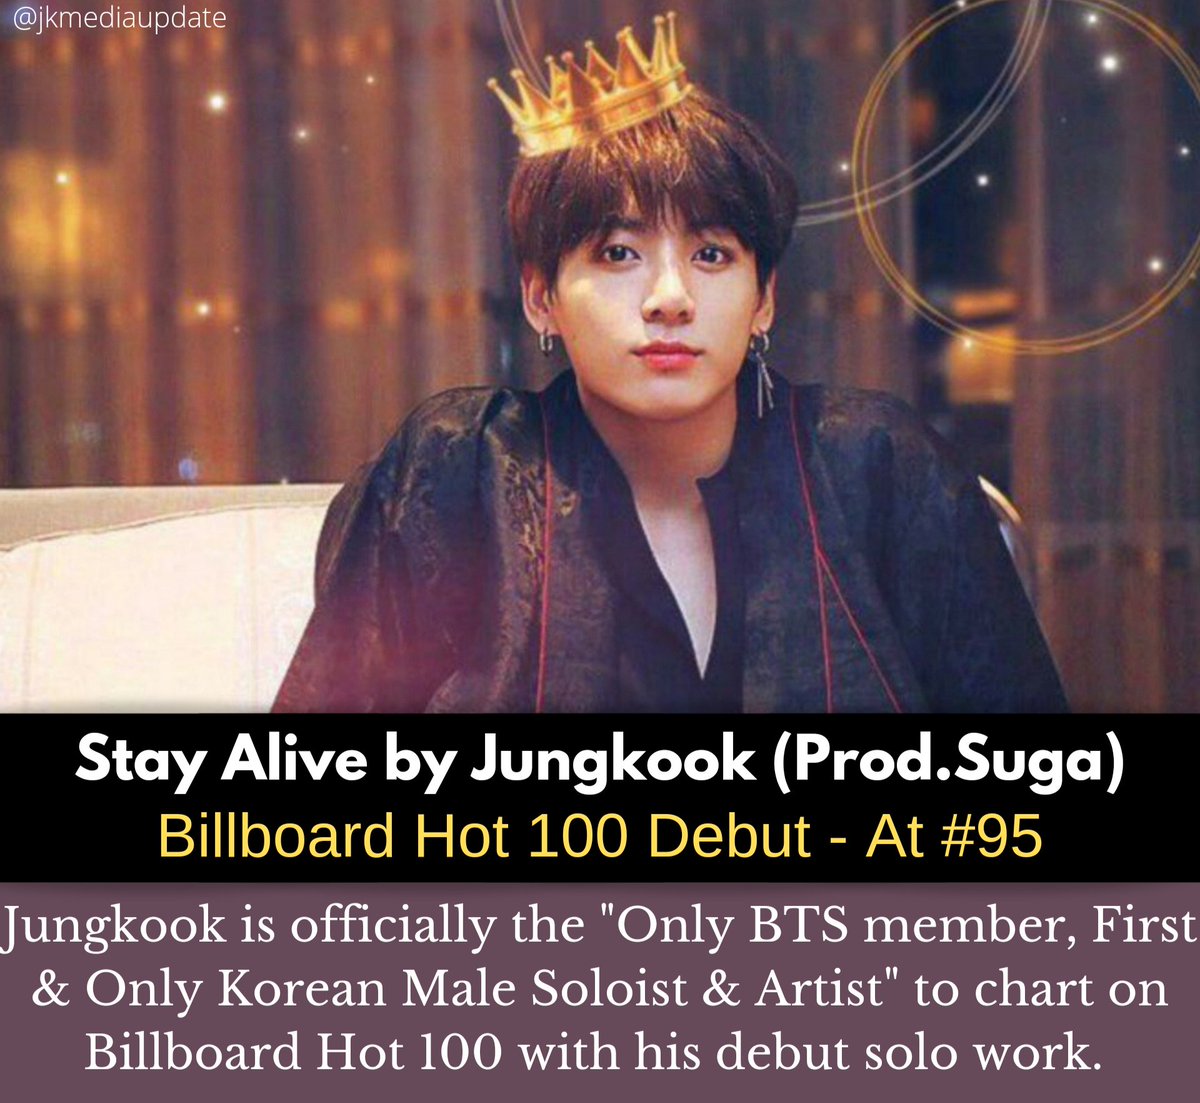 [INFO📑] Jungkook is officially the 'Only BTS member, First & Only Korean Male Soloist & Artist' to chart on Billboard Hot 100 with his debut solo work. 

#JungkookOnHot100
History Maker Jungkook
 #StayAlive #Jungkook @BTS_twt